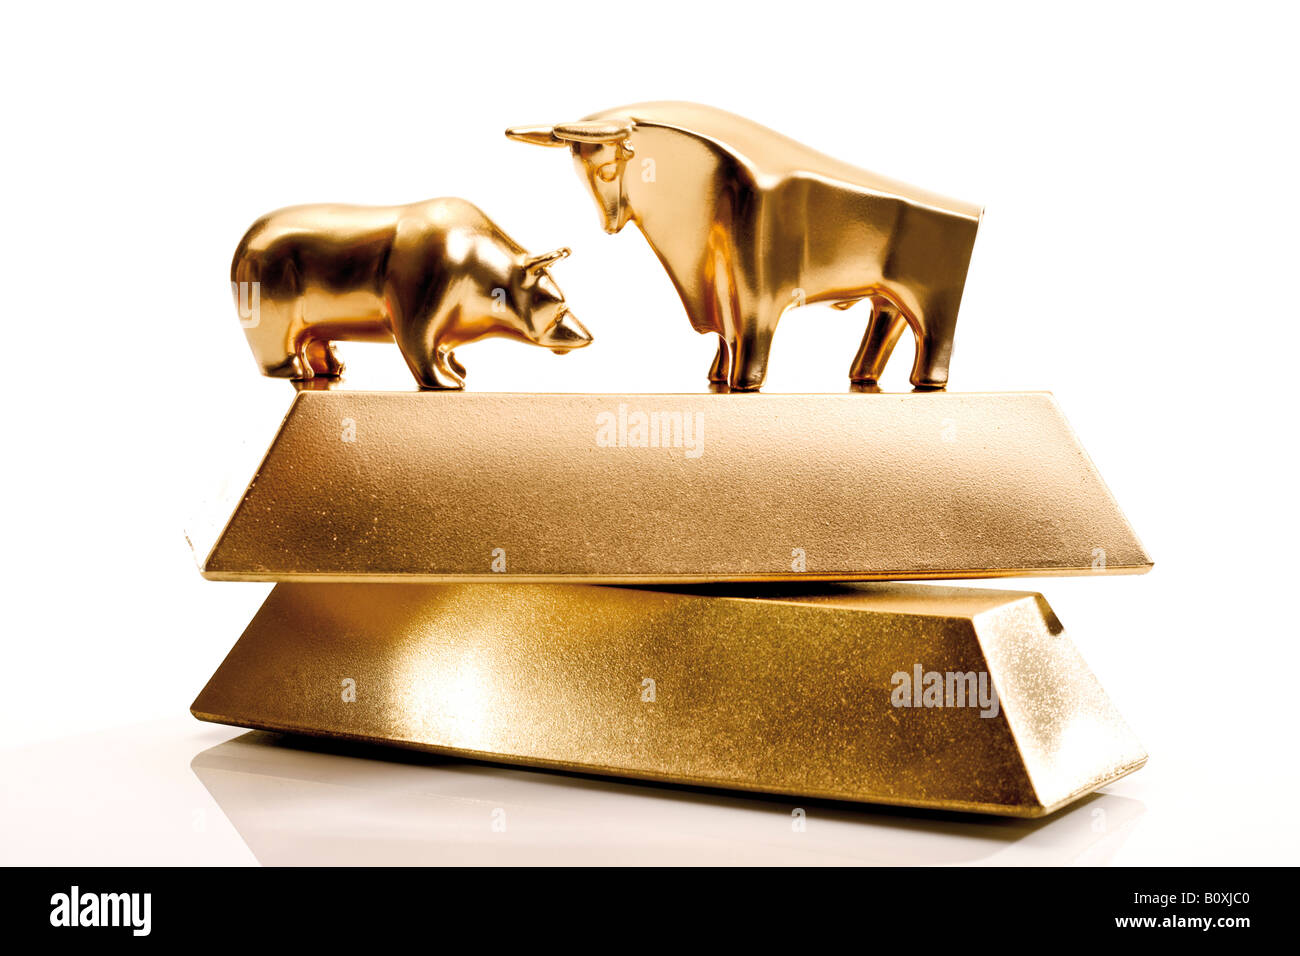 Bull and bear sculptures by gold bars Stock Photo